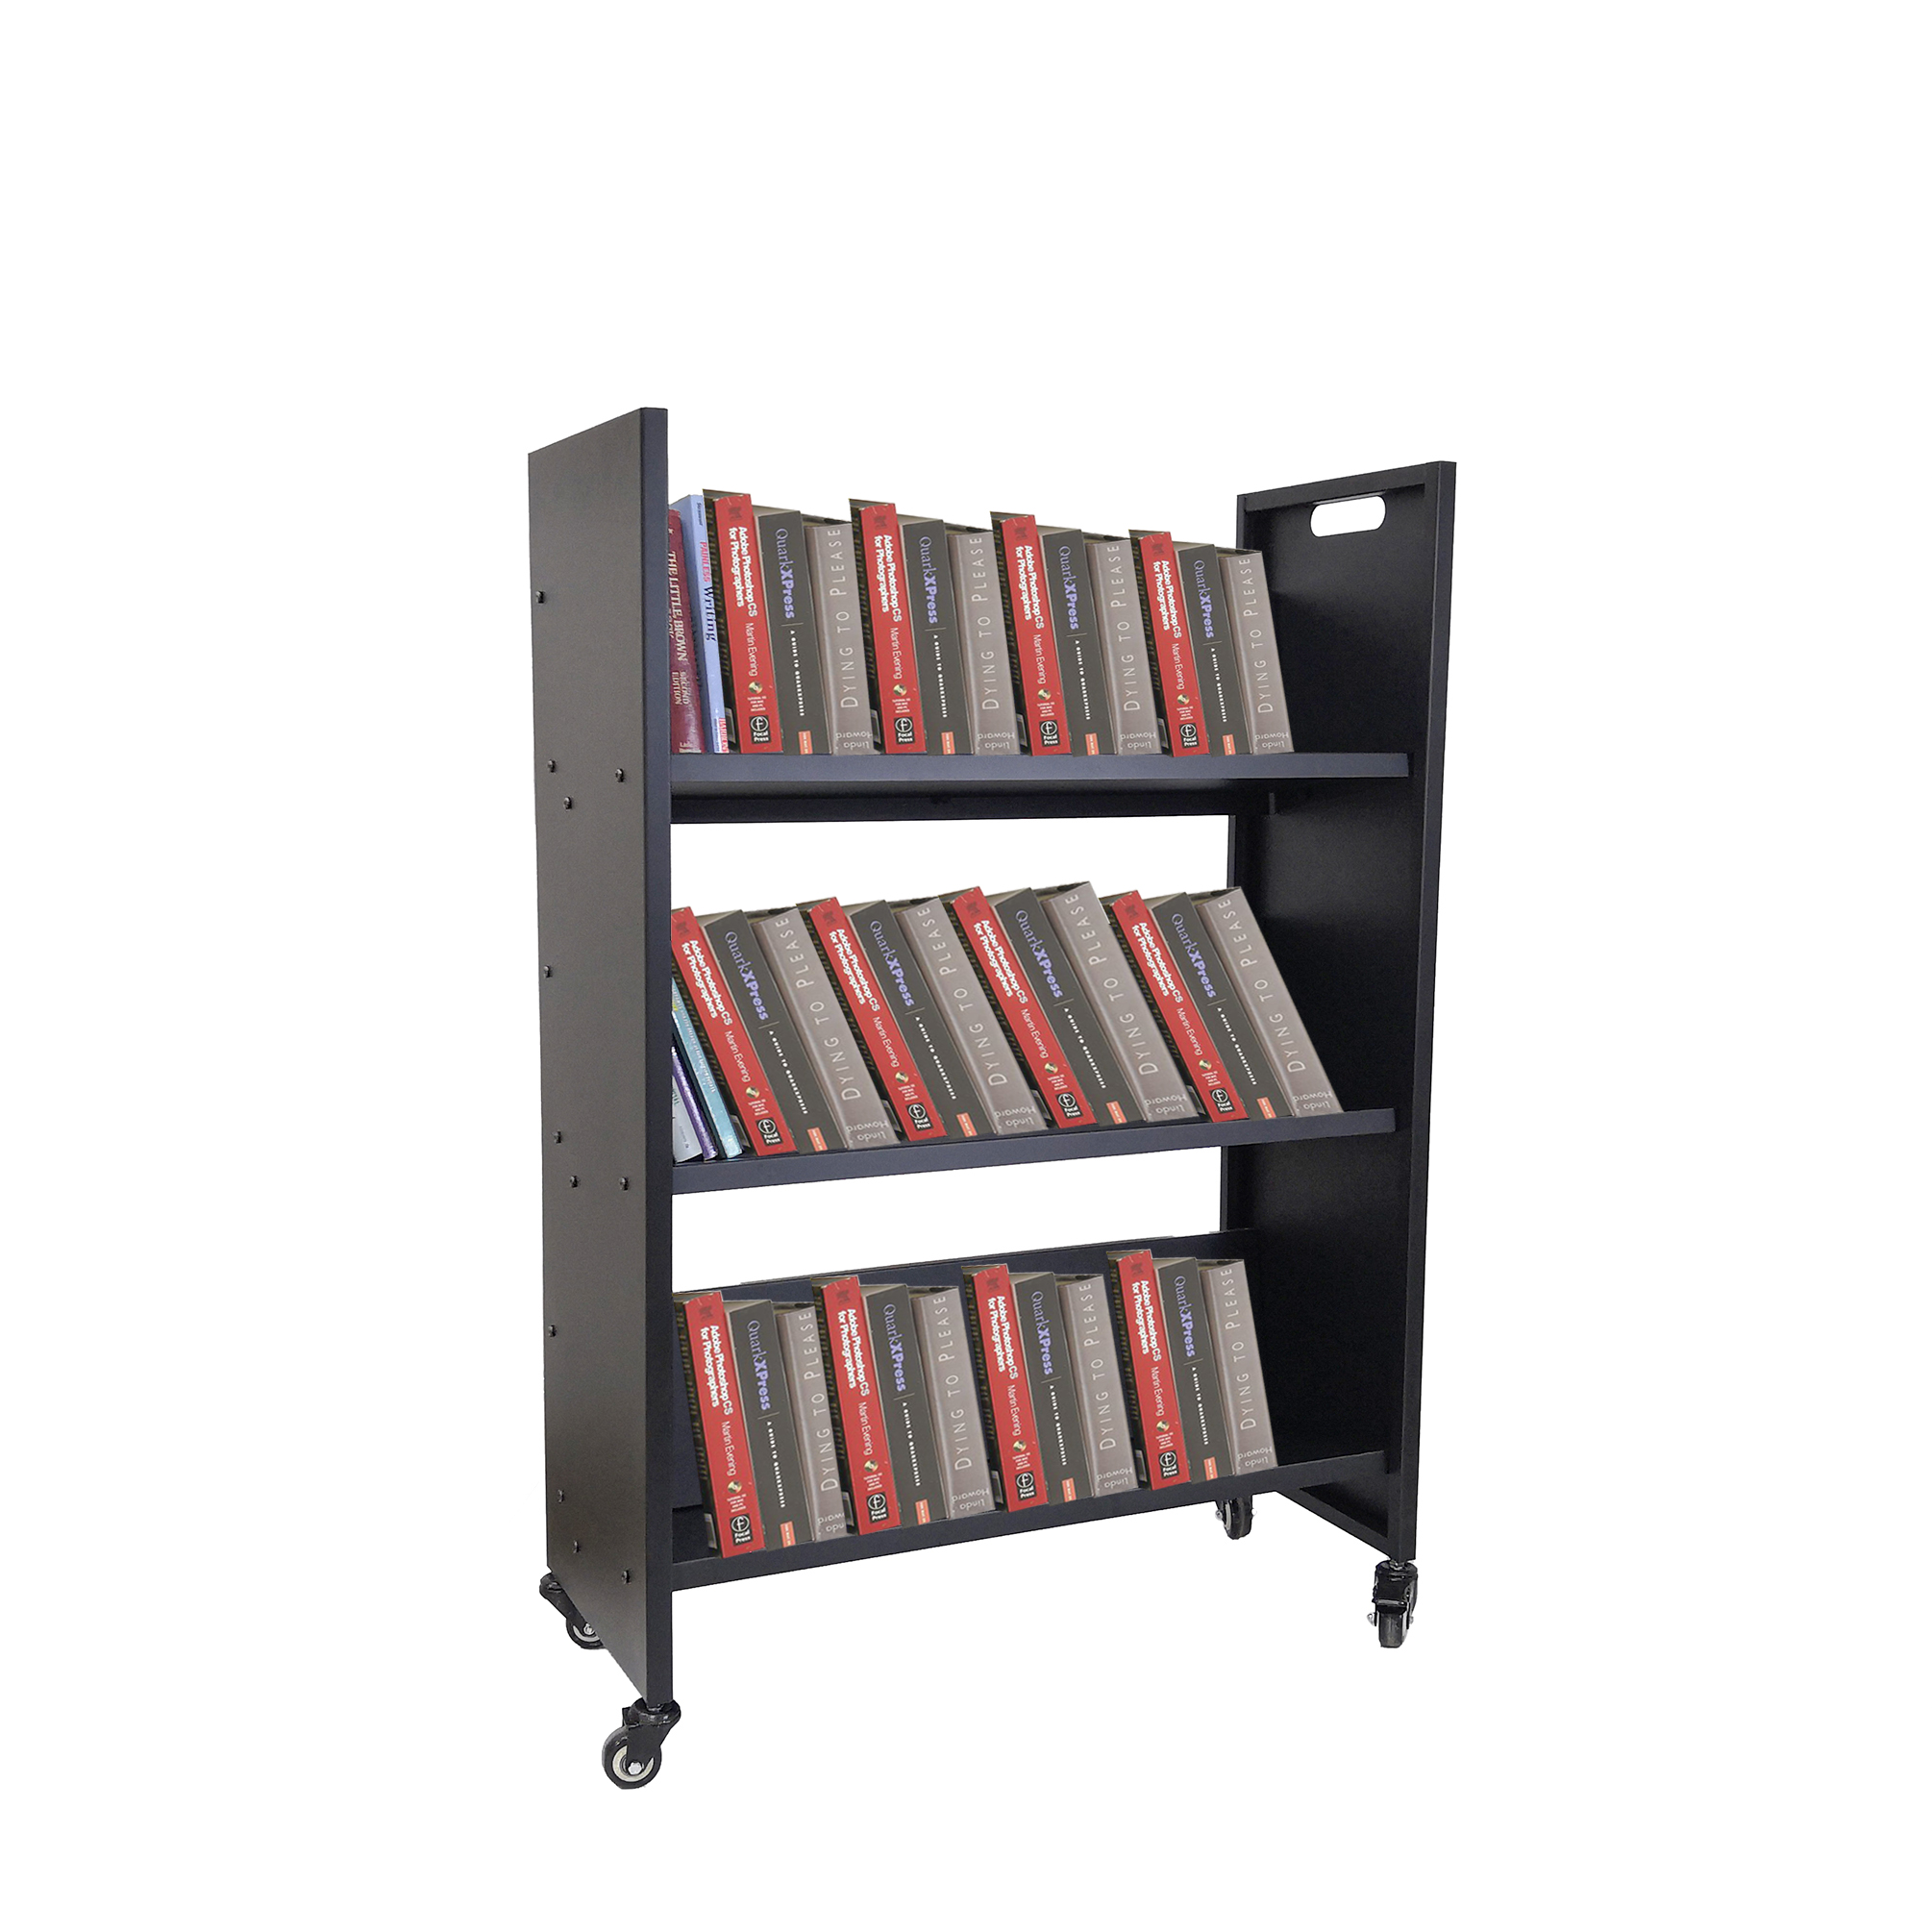 Details about   Metal Book Cart Library Cart Pew Cart Mobile Book Storage School Book Organier 